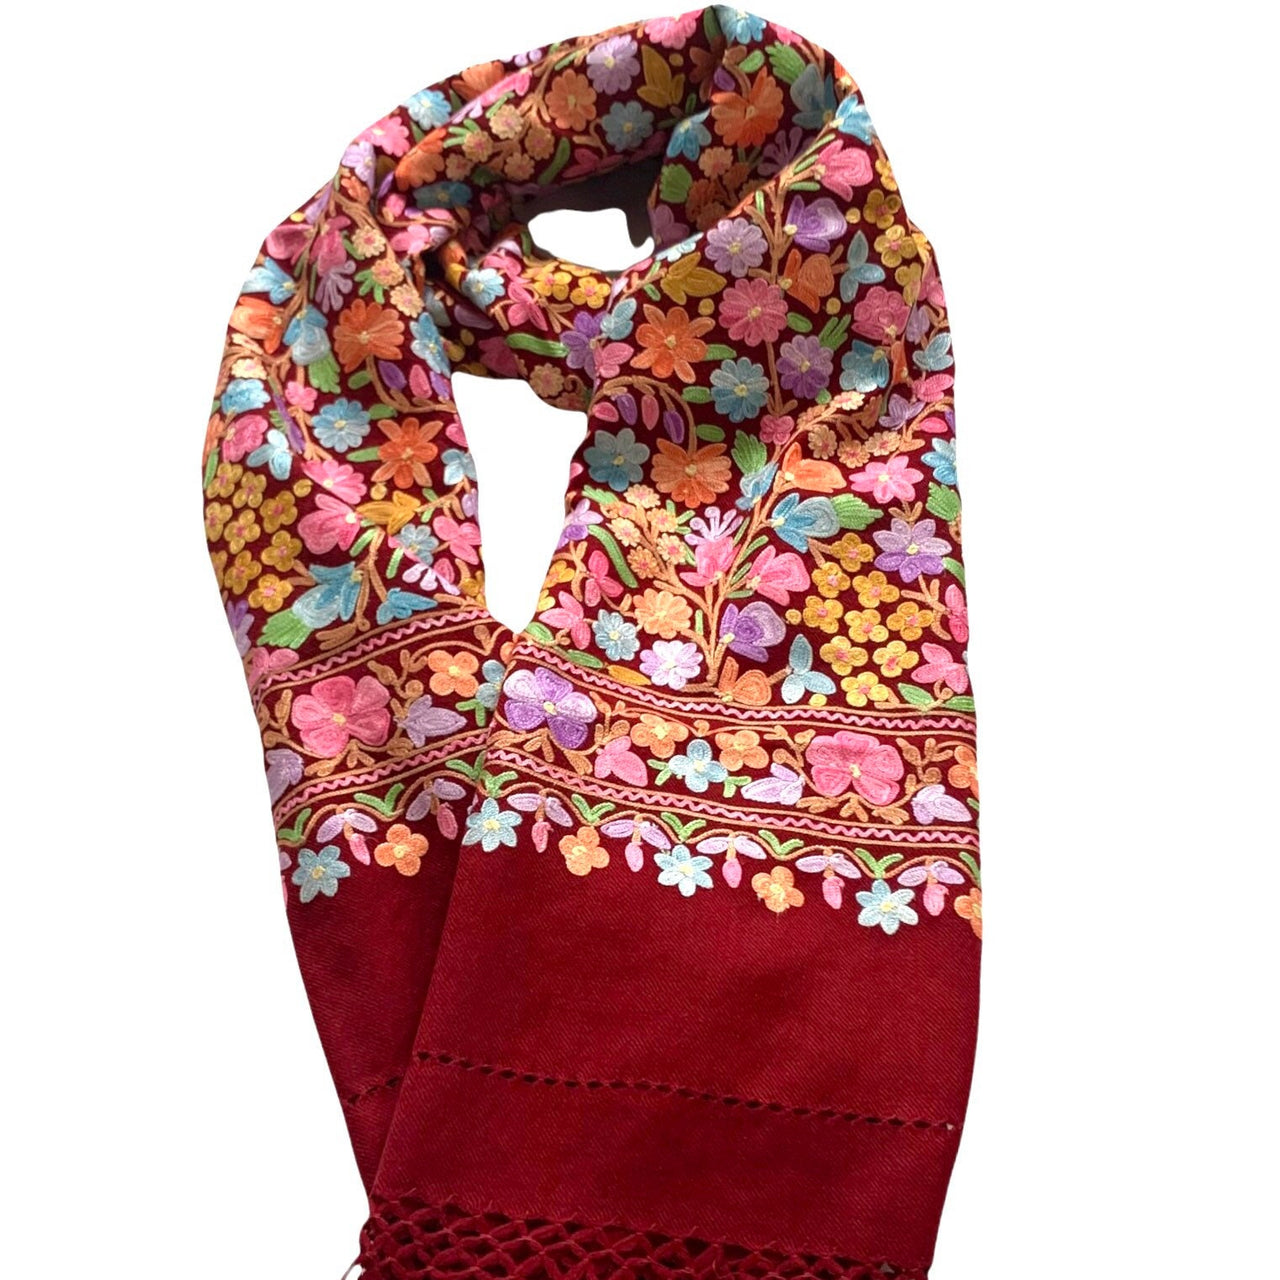 Stunning Floral Burgundy Scarf  Shawl  Women’s Wrap Stole Multi-Colored Embroidered  Stole